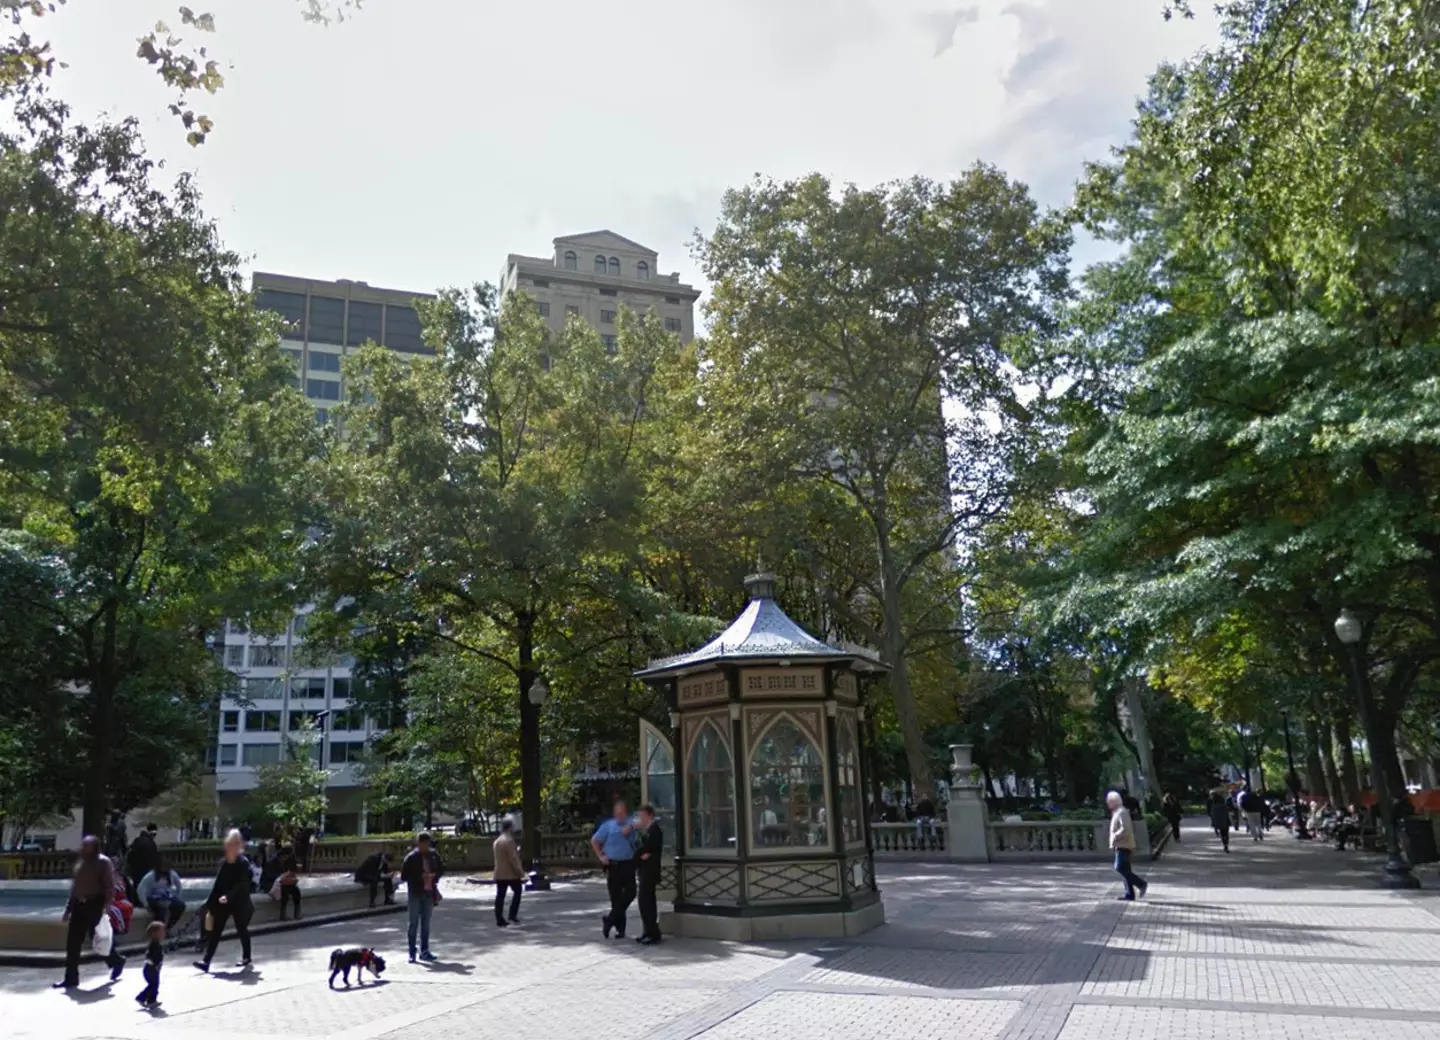 One of Jack's preferred locations to pick up orders is Rittenhouse Square.